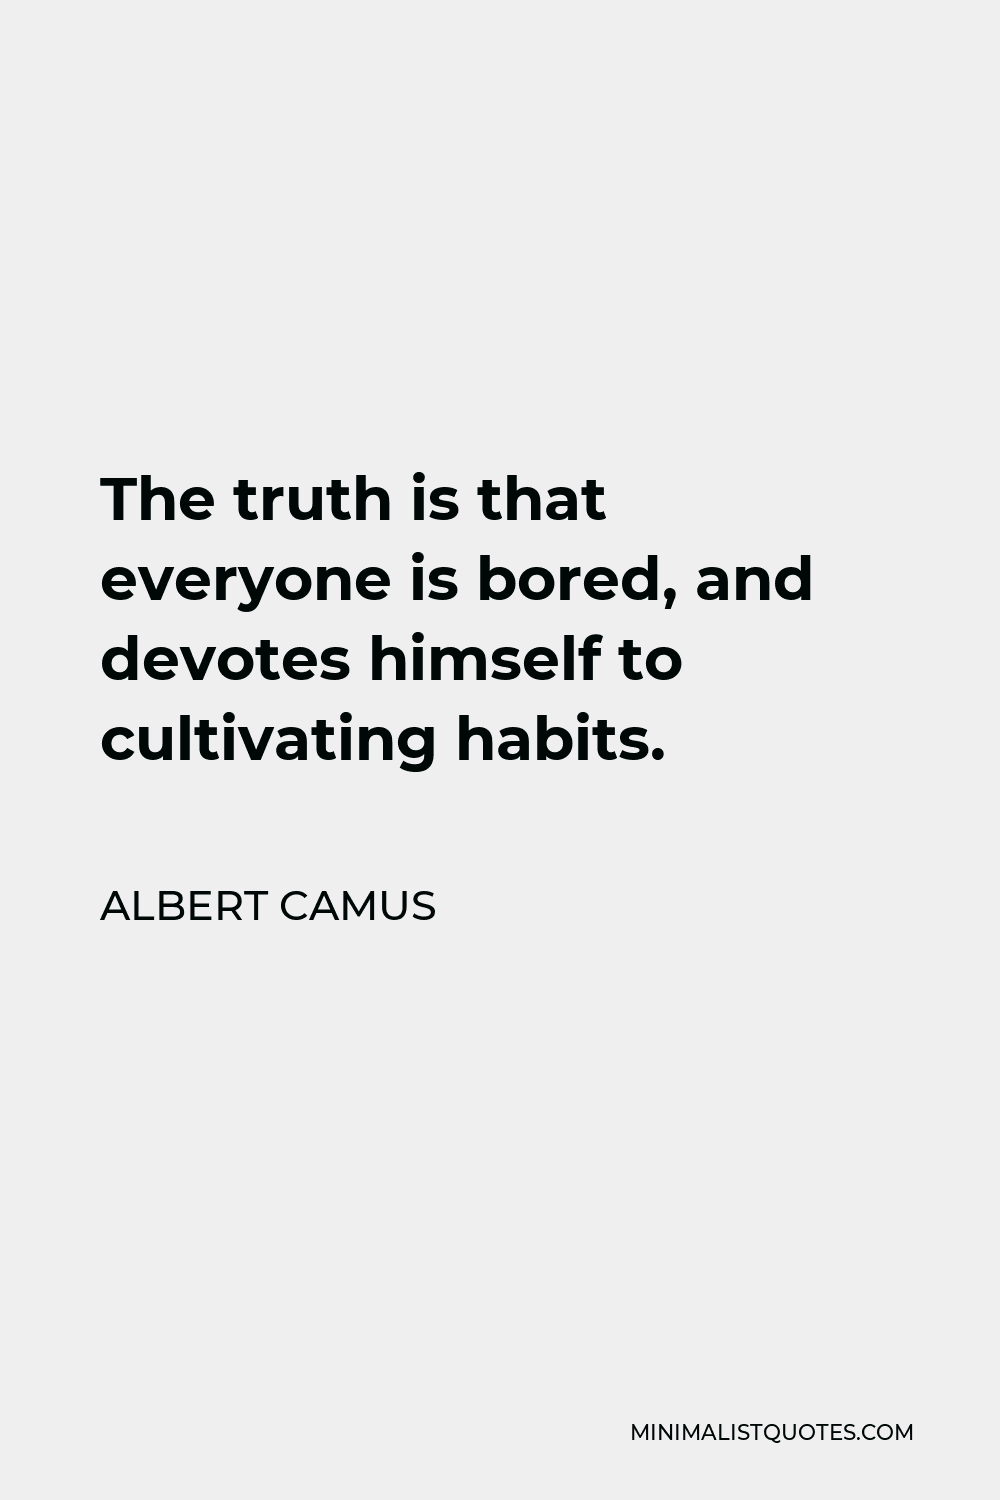 Albert Camus Quote: The truth is that everyone is bored, and devotes ...